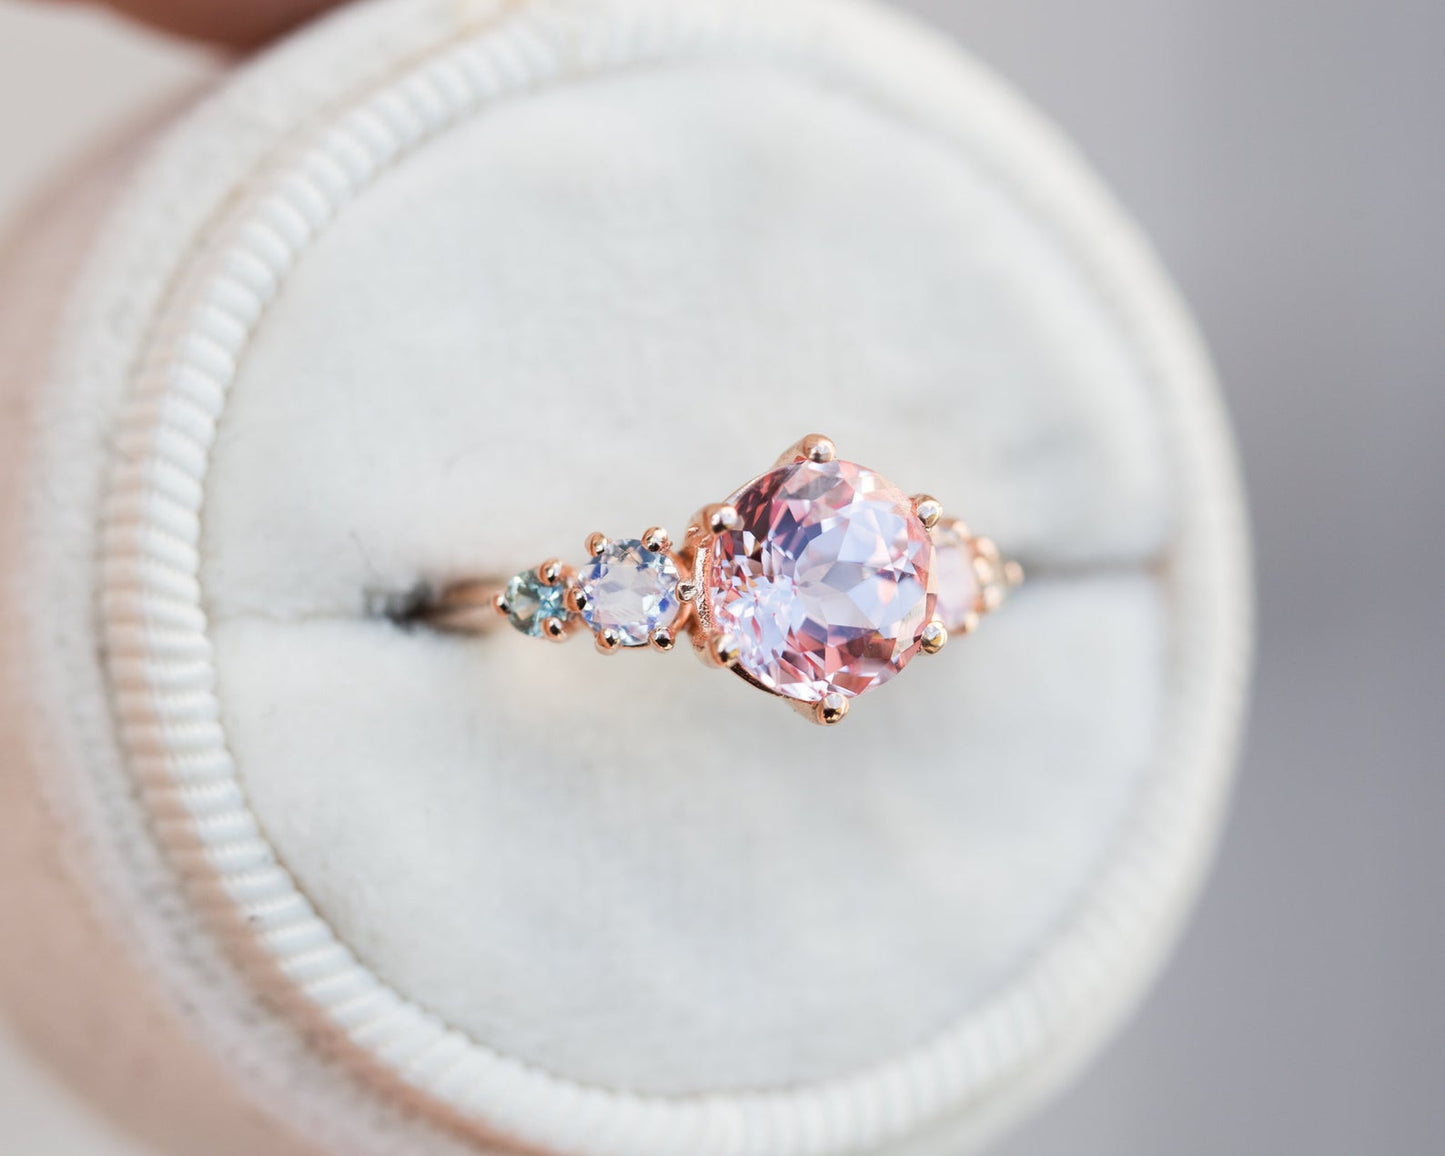 Peach sapphire five stone ring, sailor moon inspired engagement ring